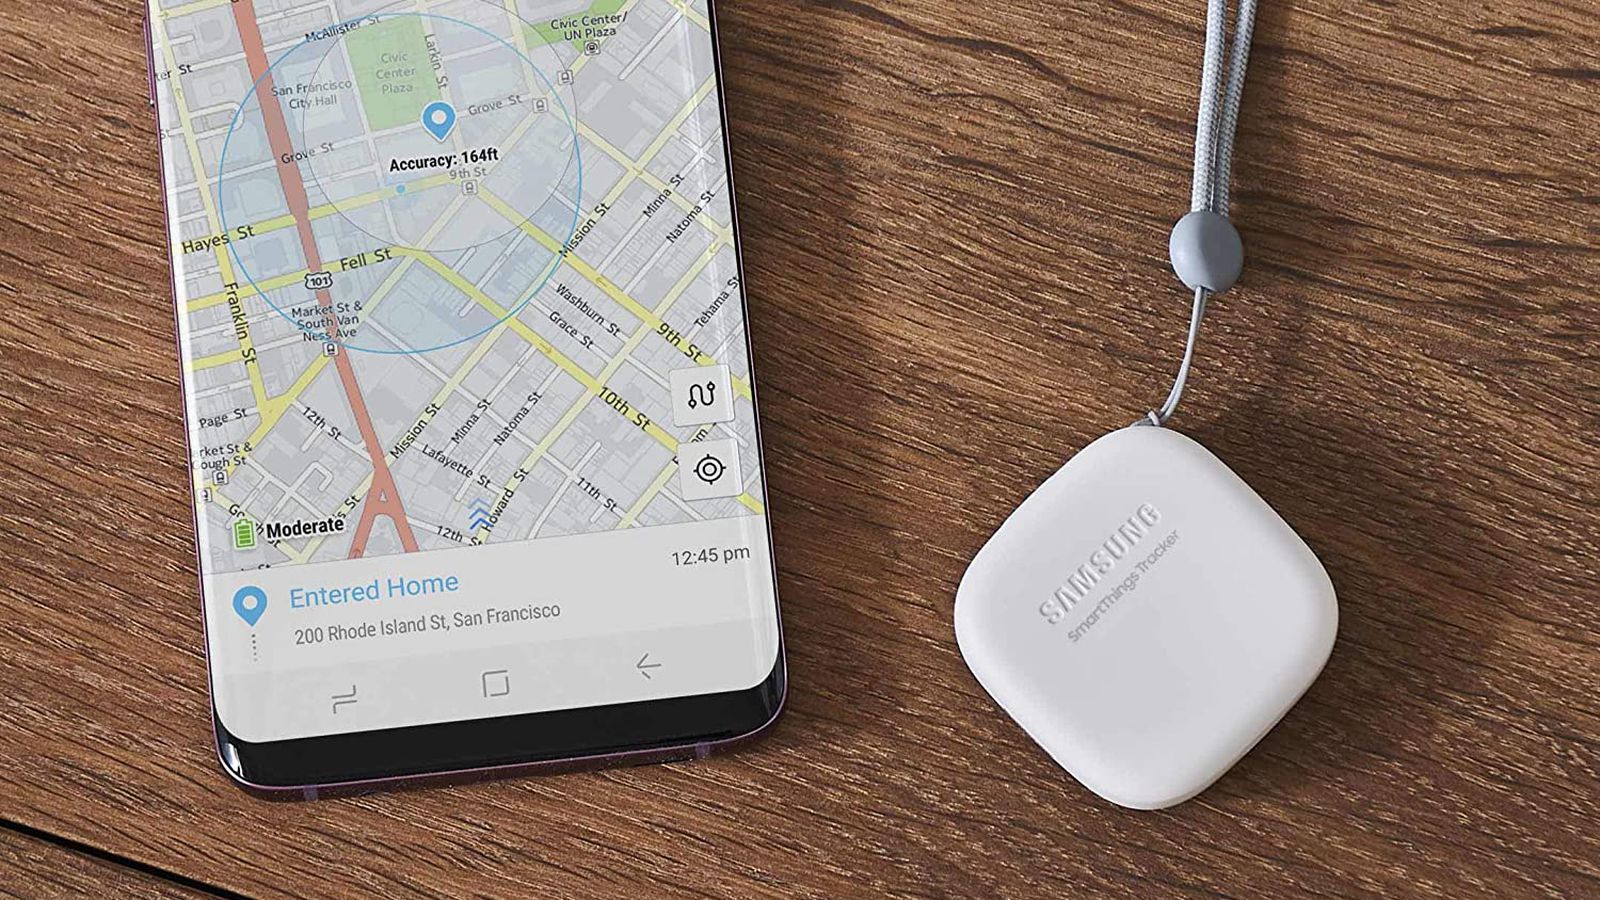 Samsung Galaxy Tags join Apple AirTags for somewhat one-sided